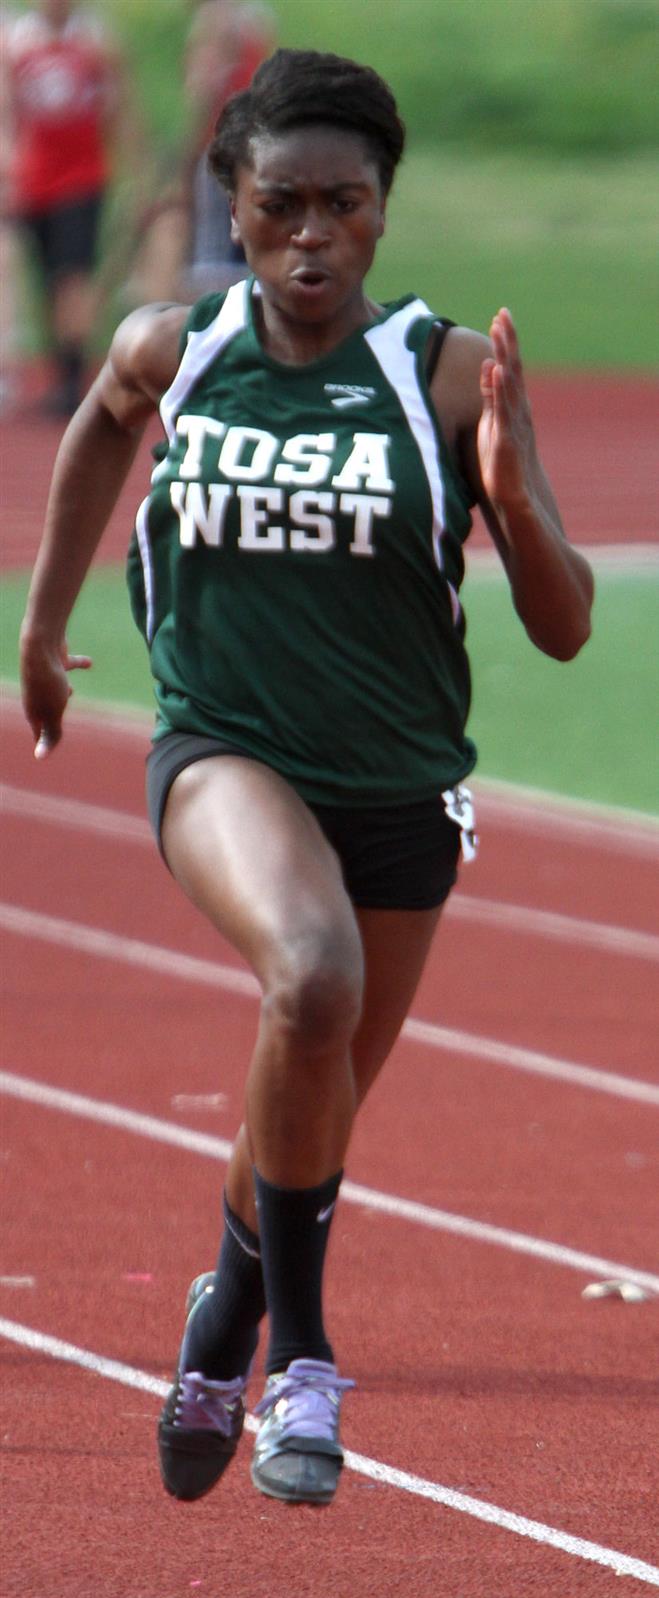 Wauwatosa West’s Mercy Ndon won the 100-meter dash and was a member of two relay team winners at the Woodland Conference Outdoor Championship on May 20 at Whitnall.